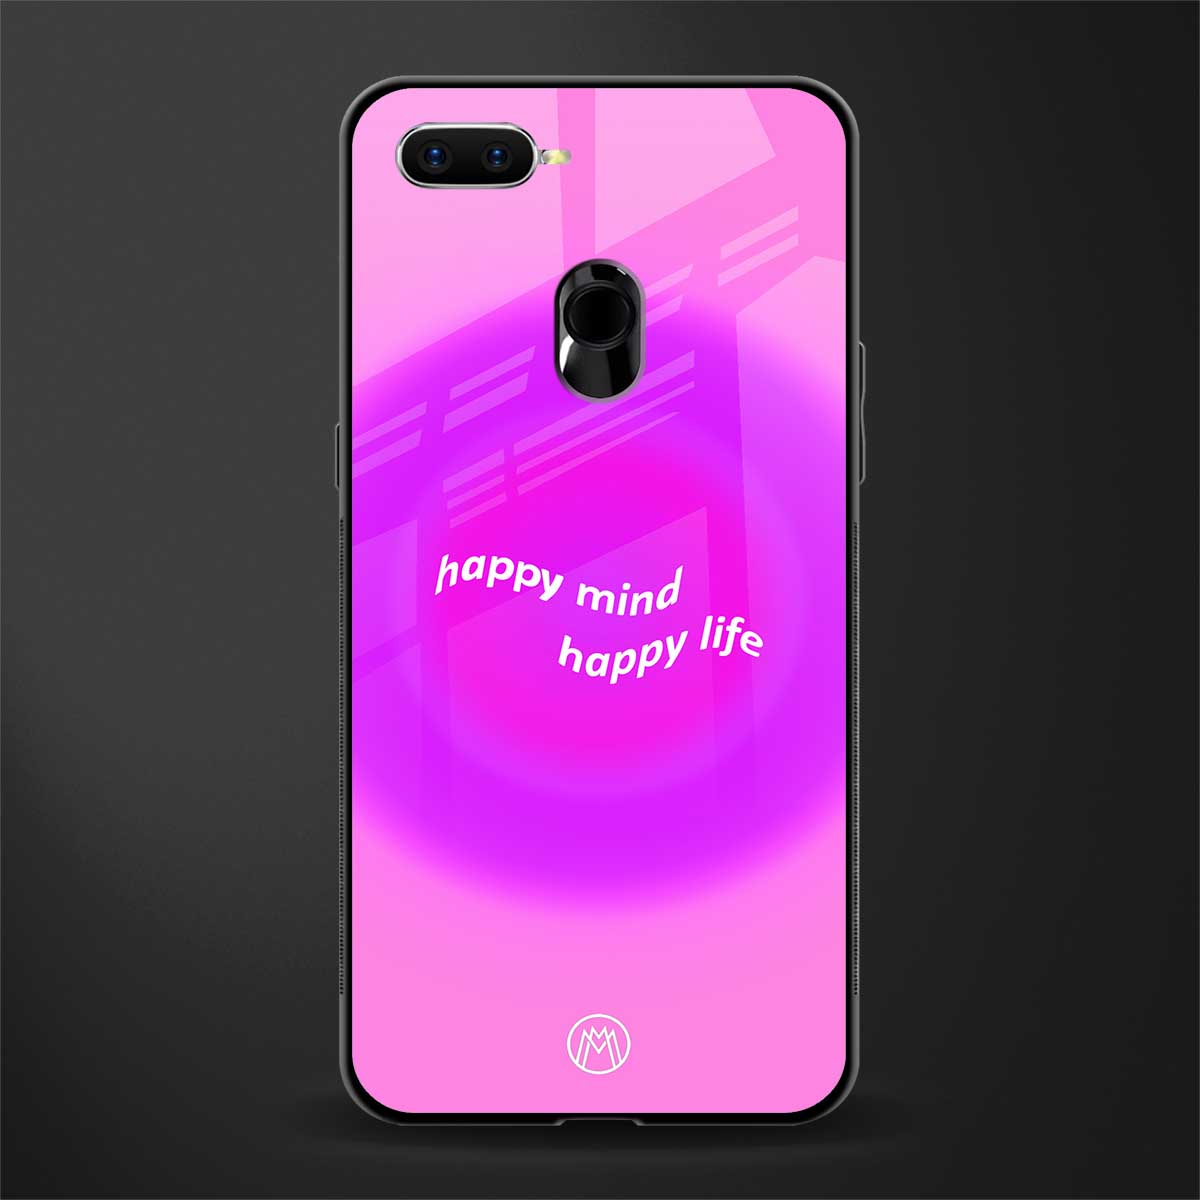 happy mind glass case for realme 2 pro image